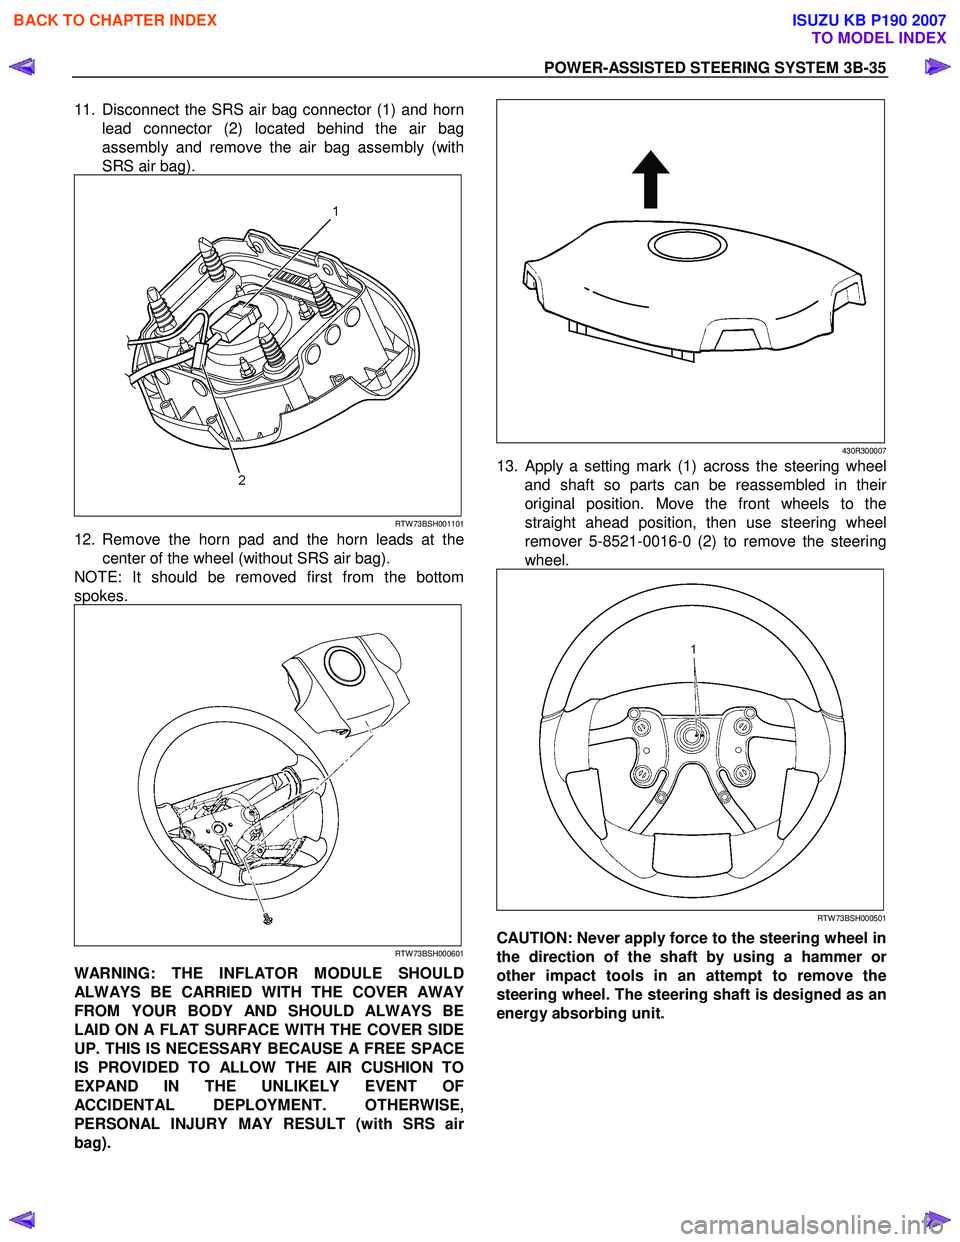 ISUZU KB P190 2007  Workshop Owners Guide POWER-ASSISTED STEERING SYSTEM 3B-35 
11.  Disconnect the SRS air bag connector (1) and horn 
lead connector (2) located behind the air bag 
assembly and remove the air bag assembly (with 
SRS air bag